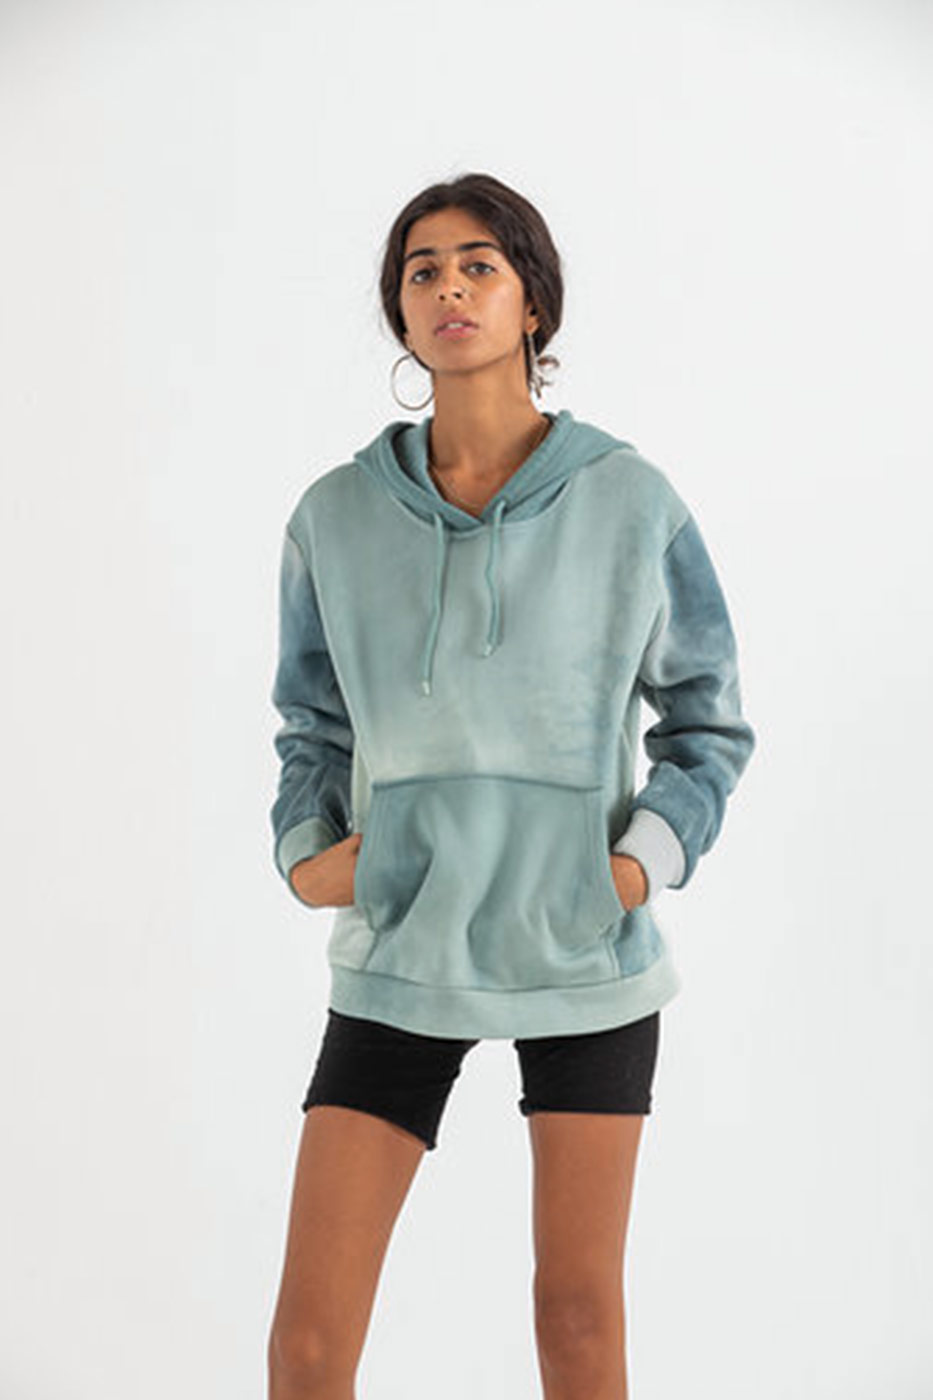 The Illusion Hoodie In Mint Tie Dye Print - Dresscode, Egypt